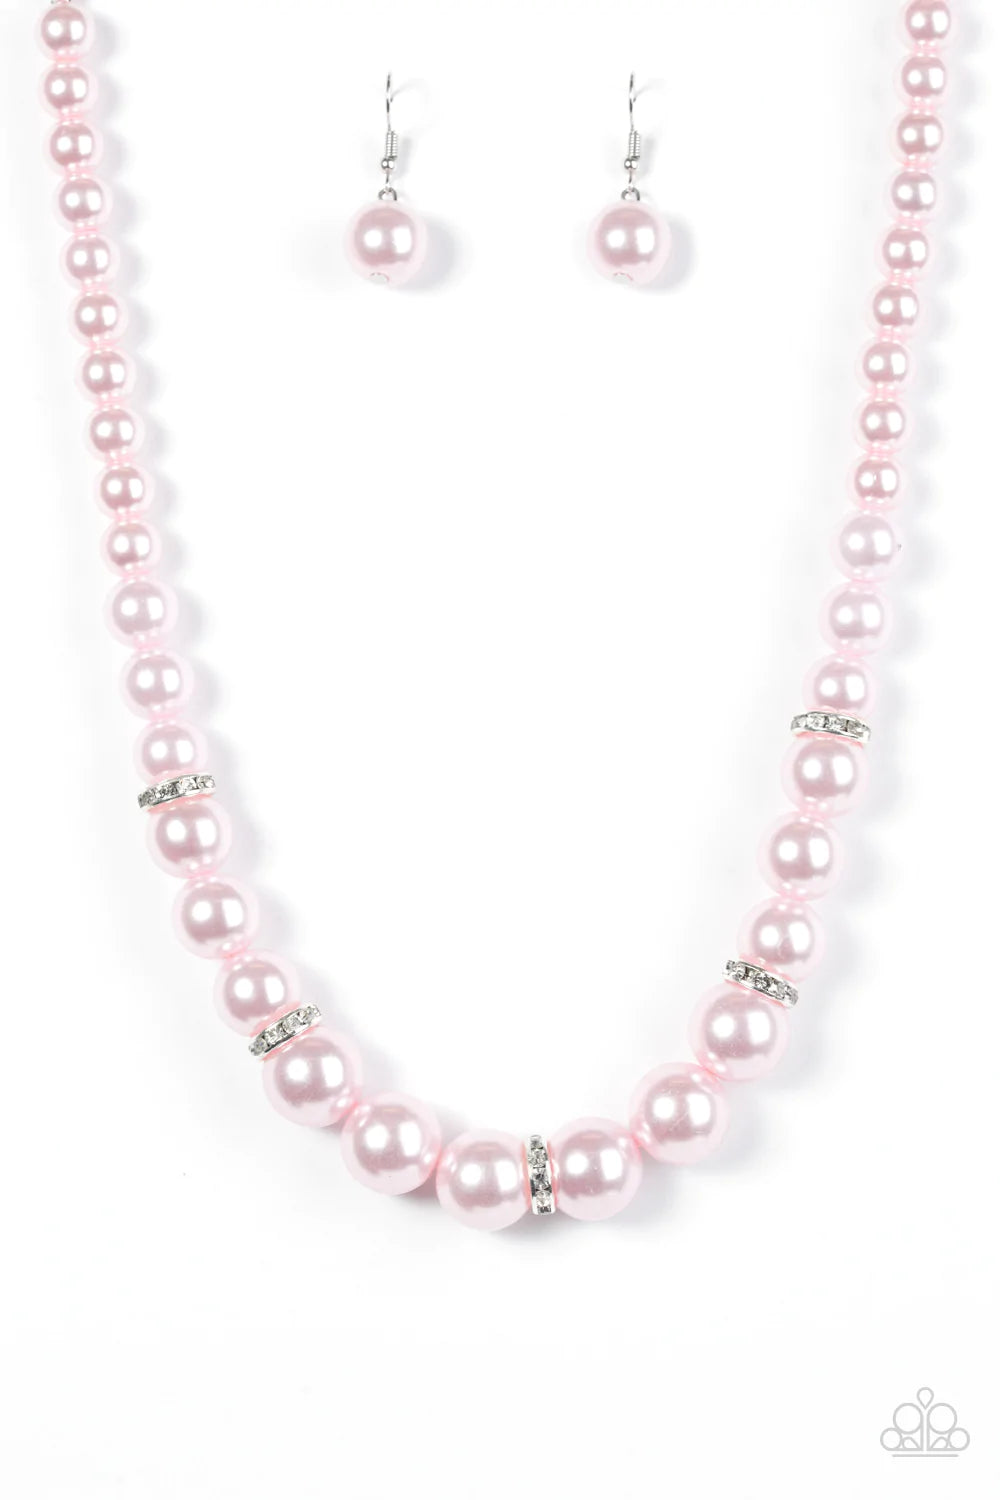 Paparazzi Necklace ~ You Had Me At Pearls - Pink